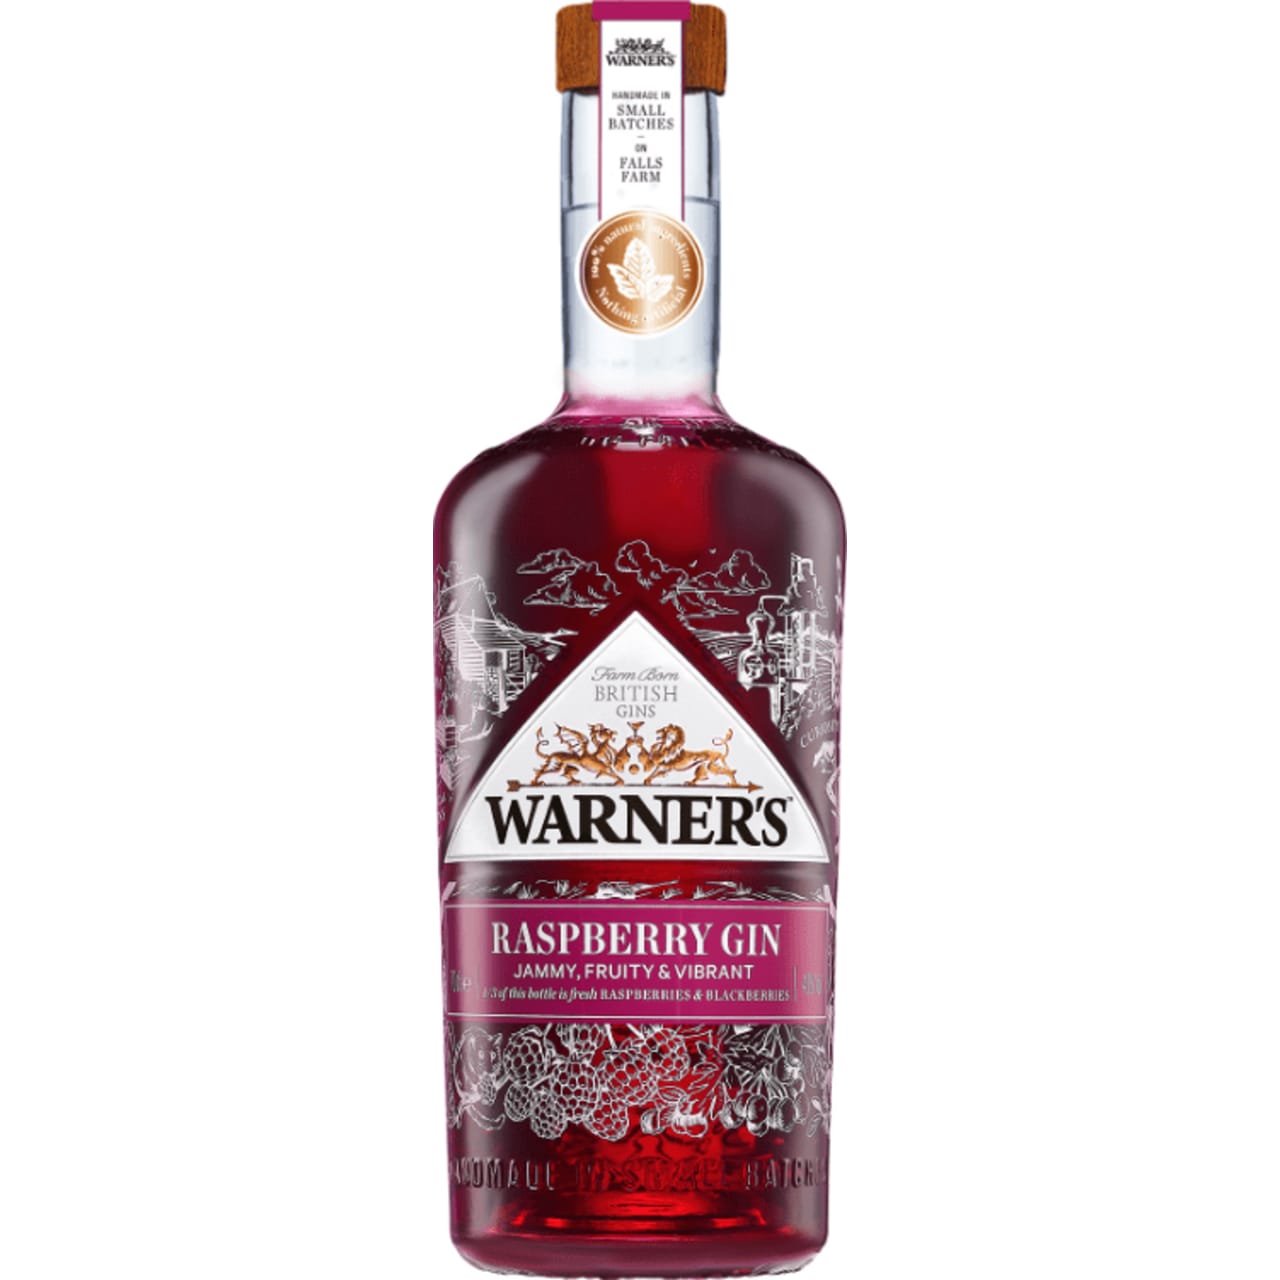 Sweet and vibrant addition to the astounding Warner Edwards range. Bursting with natural flavour and colour, this pink gin is made using fresh foraged raspberries and blackberries alongside hand picked hedgerow elderflower from the farm itself.